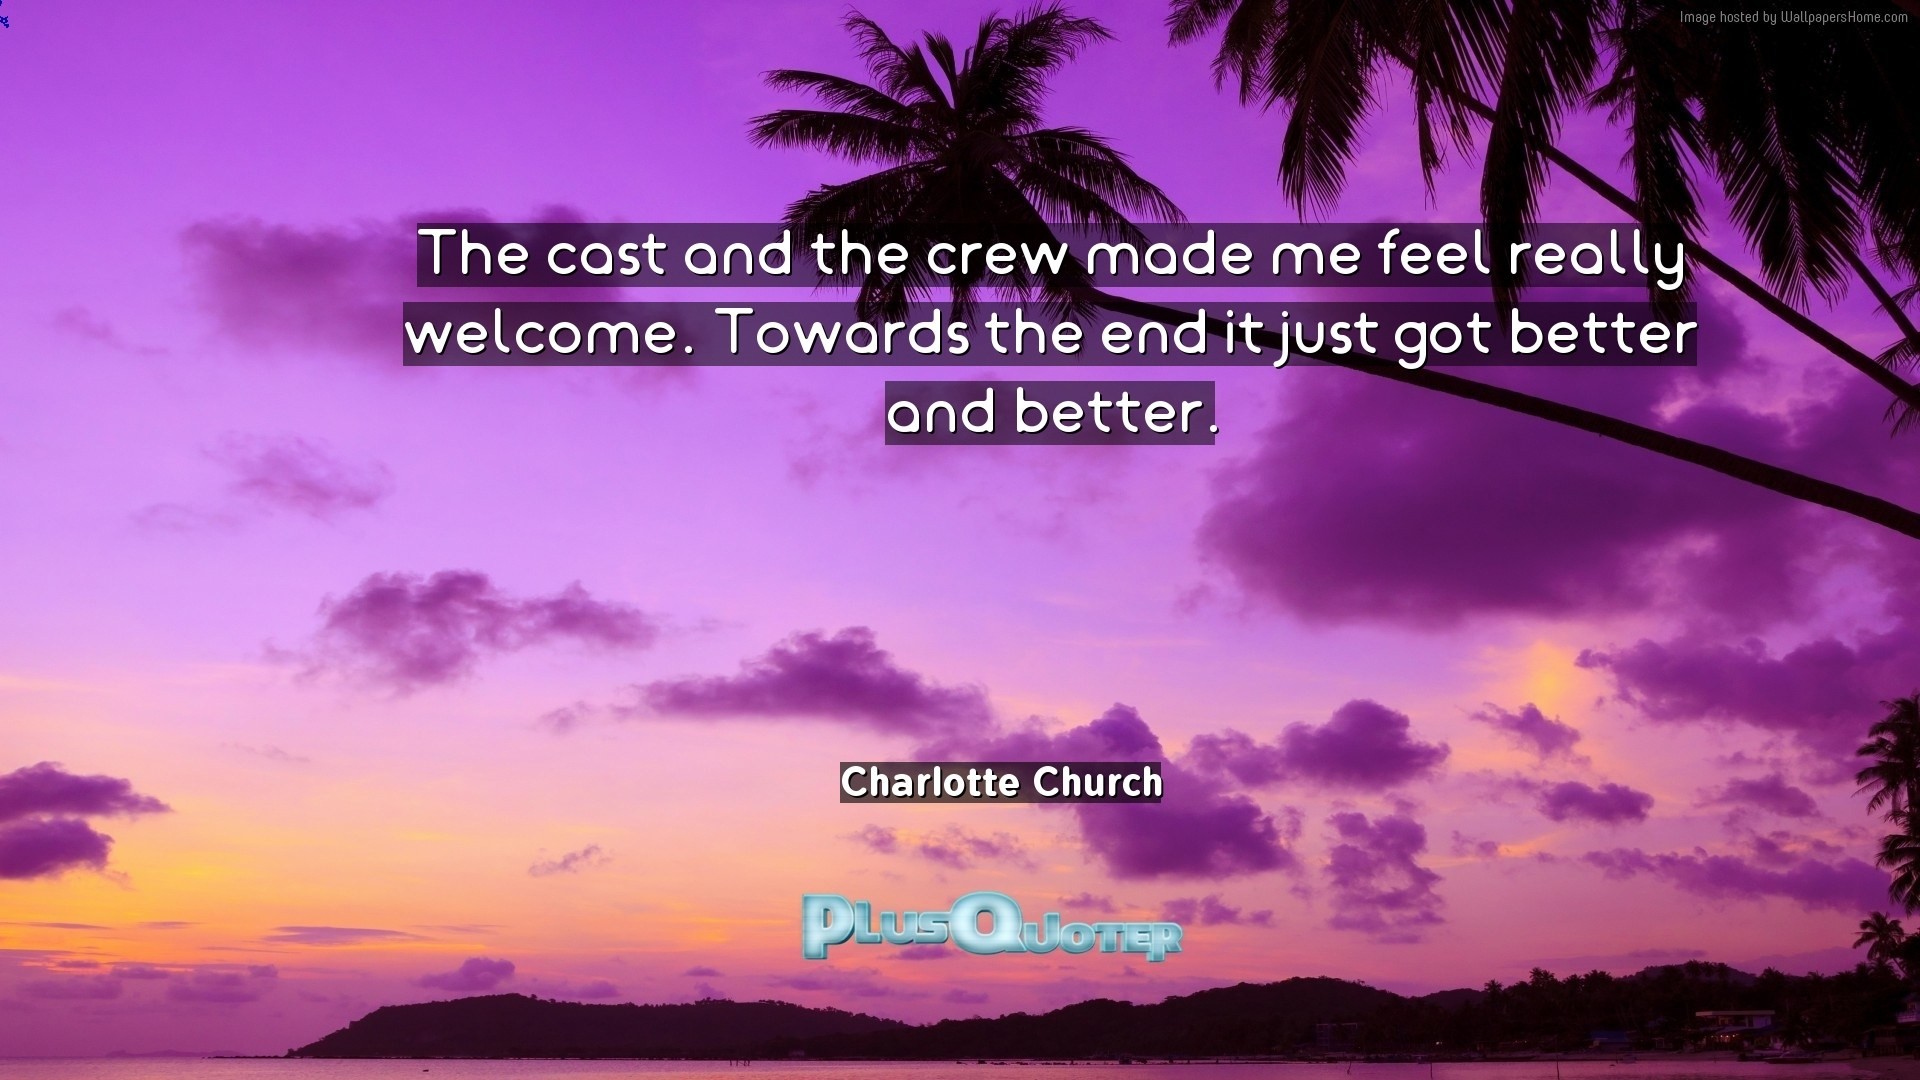 1920x1080 Download Wallpaper with inspirational Quotes- "The cast and the crew made  me feel really